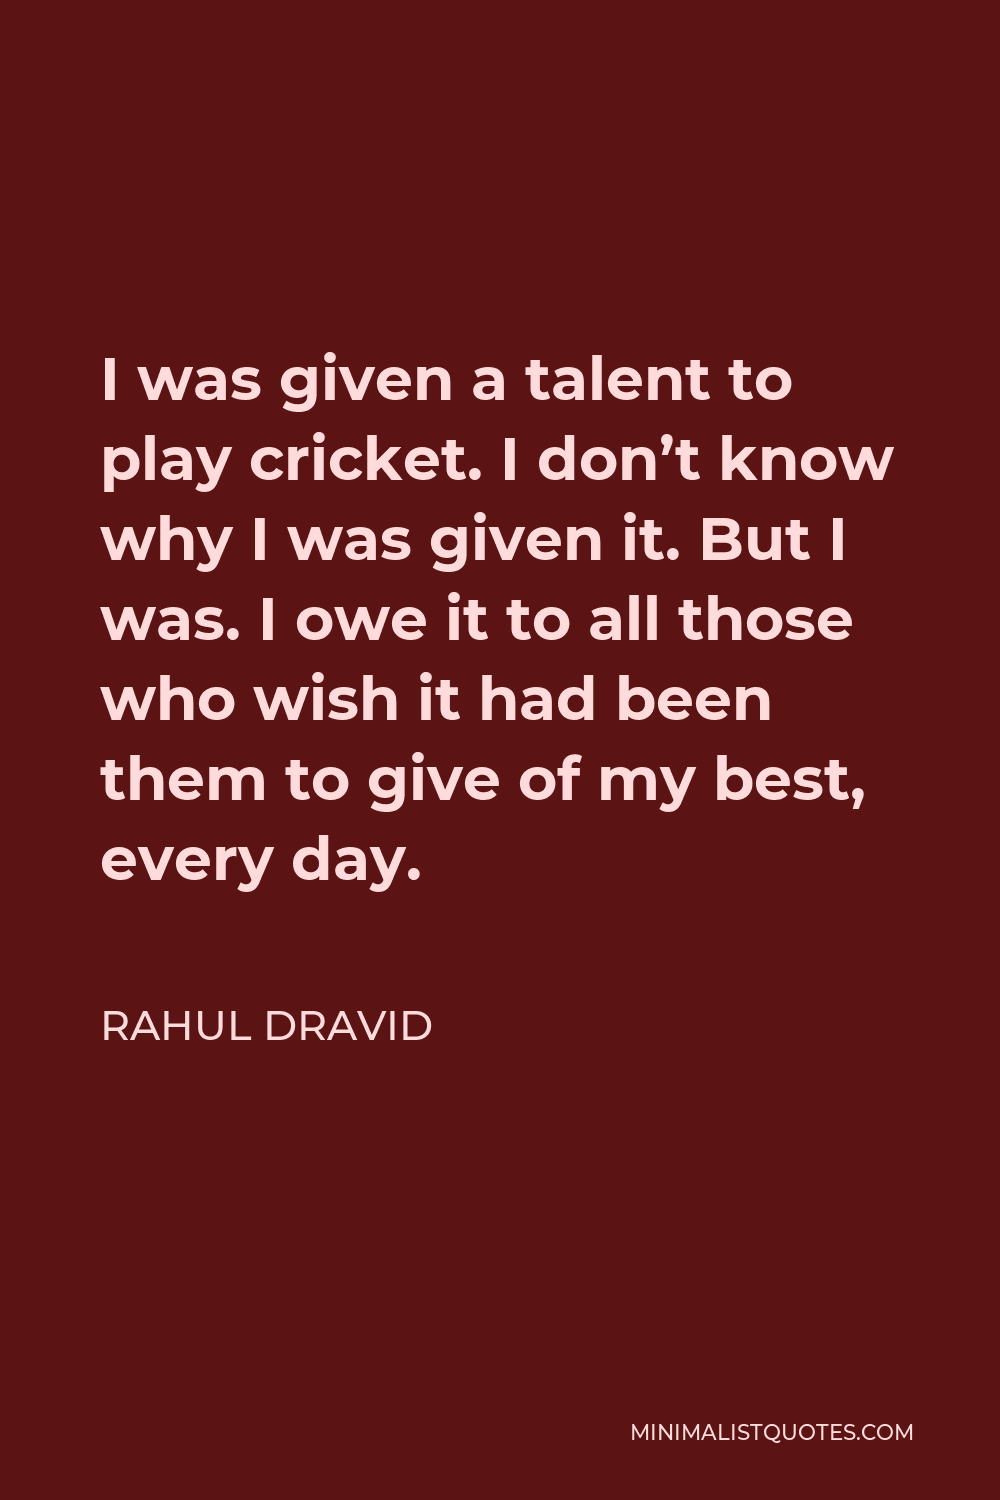 Rahul Dravid Quote - I was given a talent to play cricket. I don’t know why I was given it. But I was. I owe it to all those who wish it had been them to give of my best, every day.